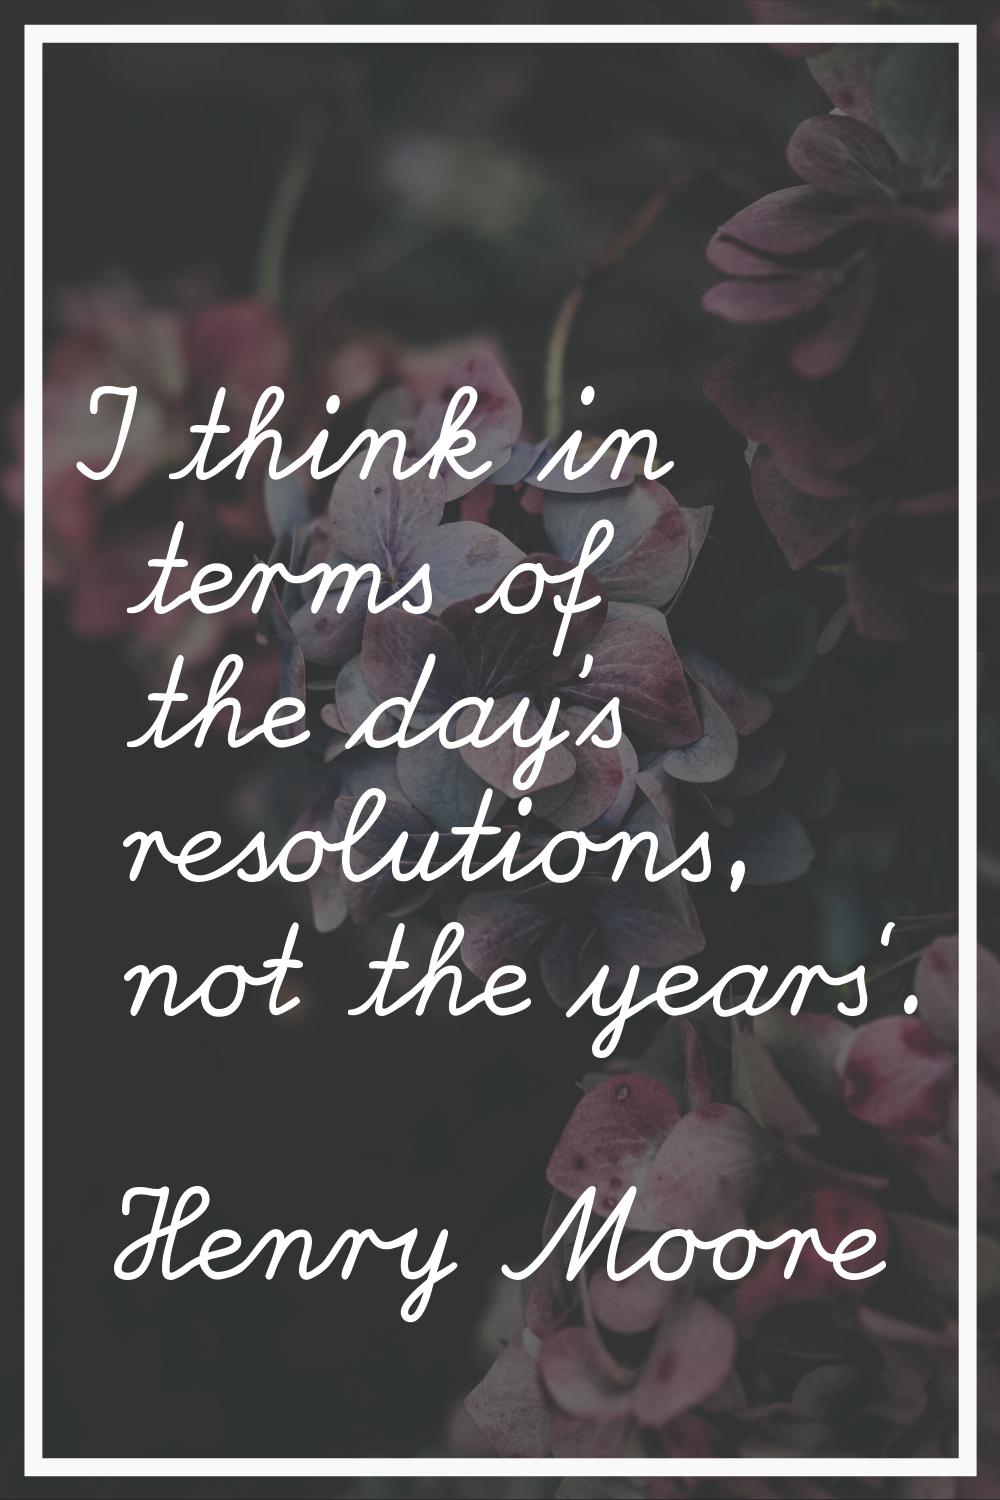 I think in terms of the day's resolutions, not the years'.